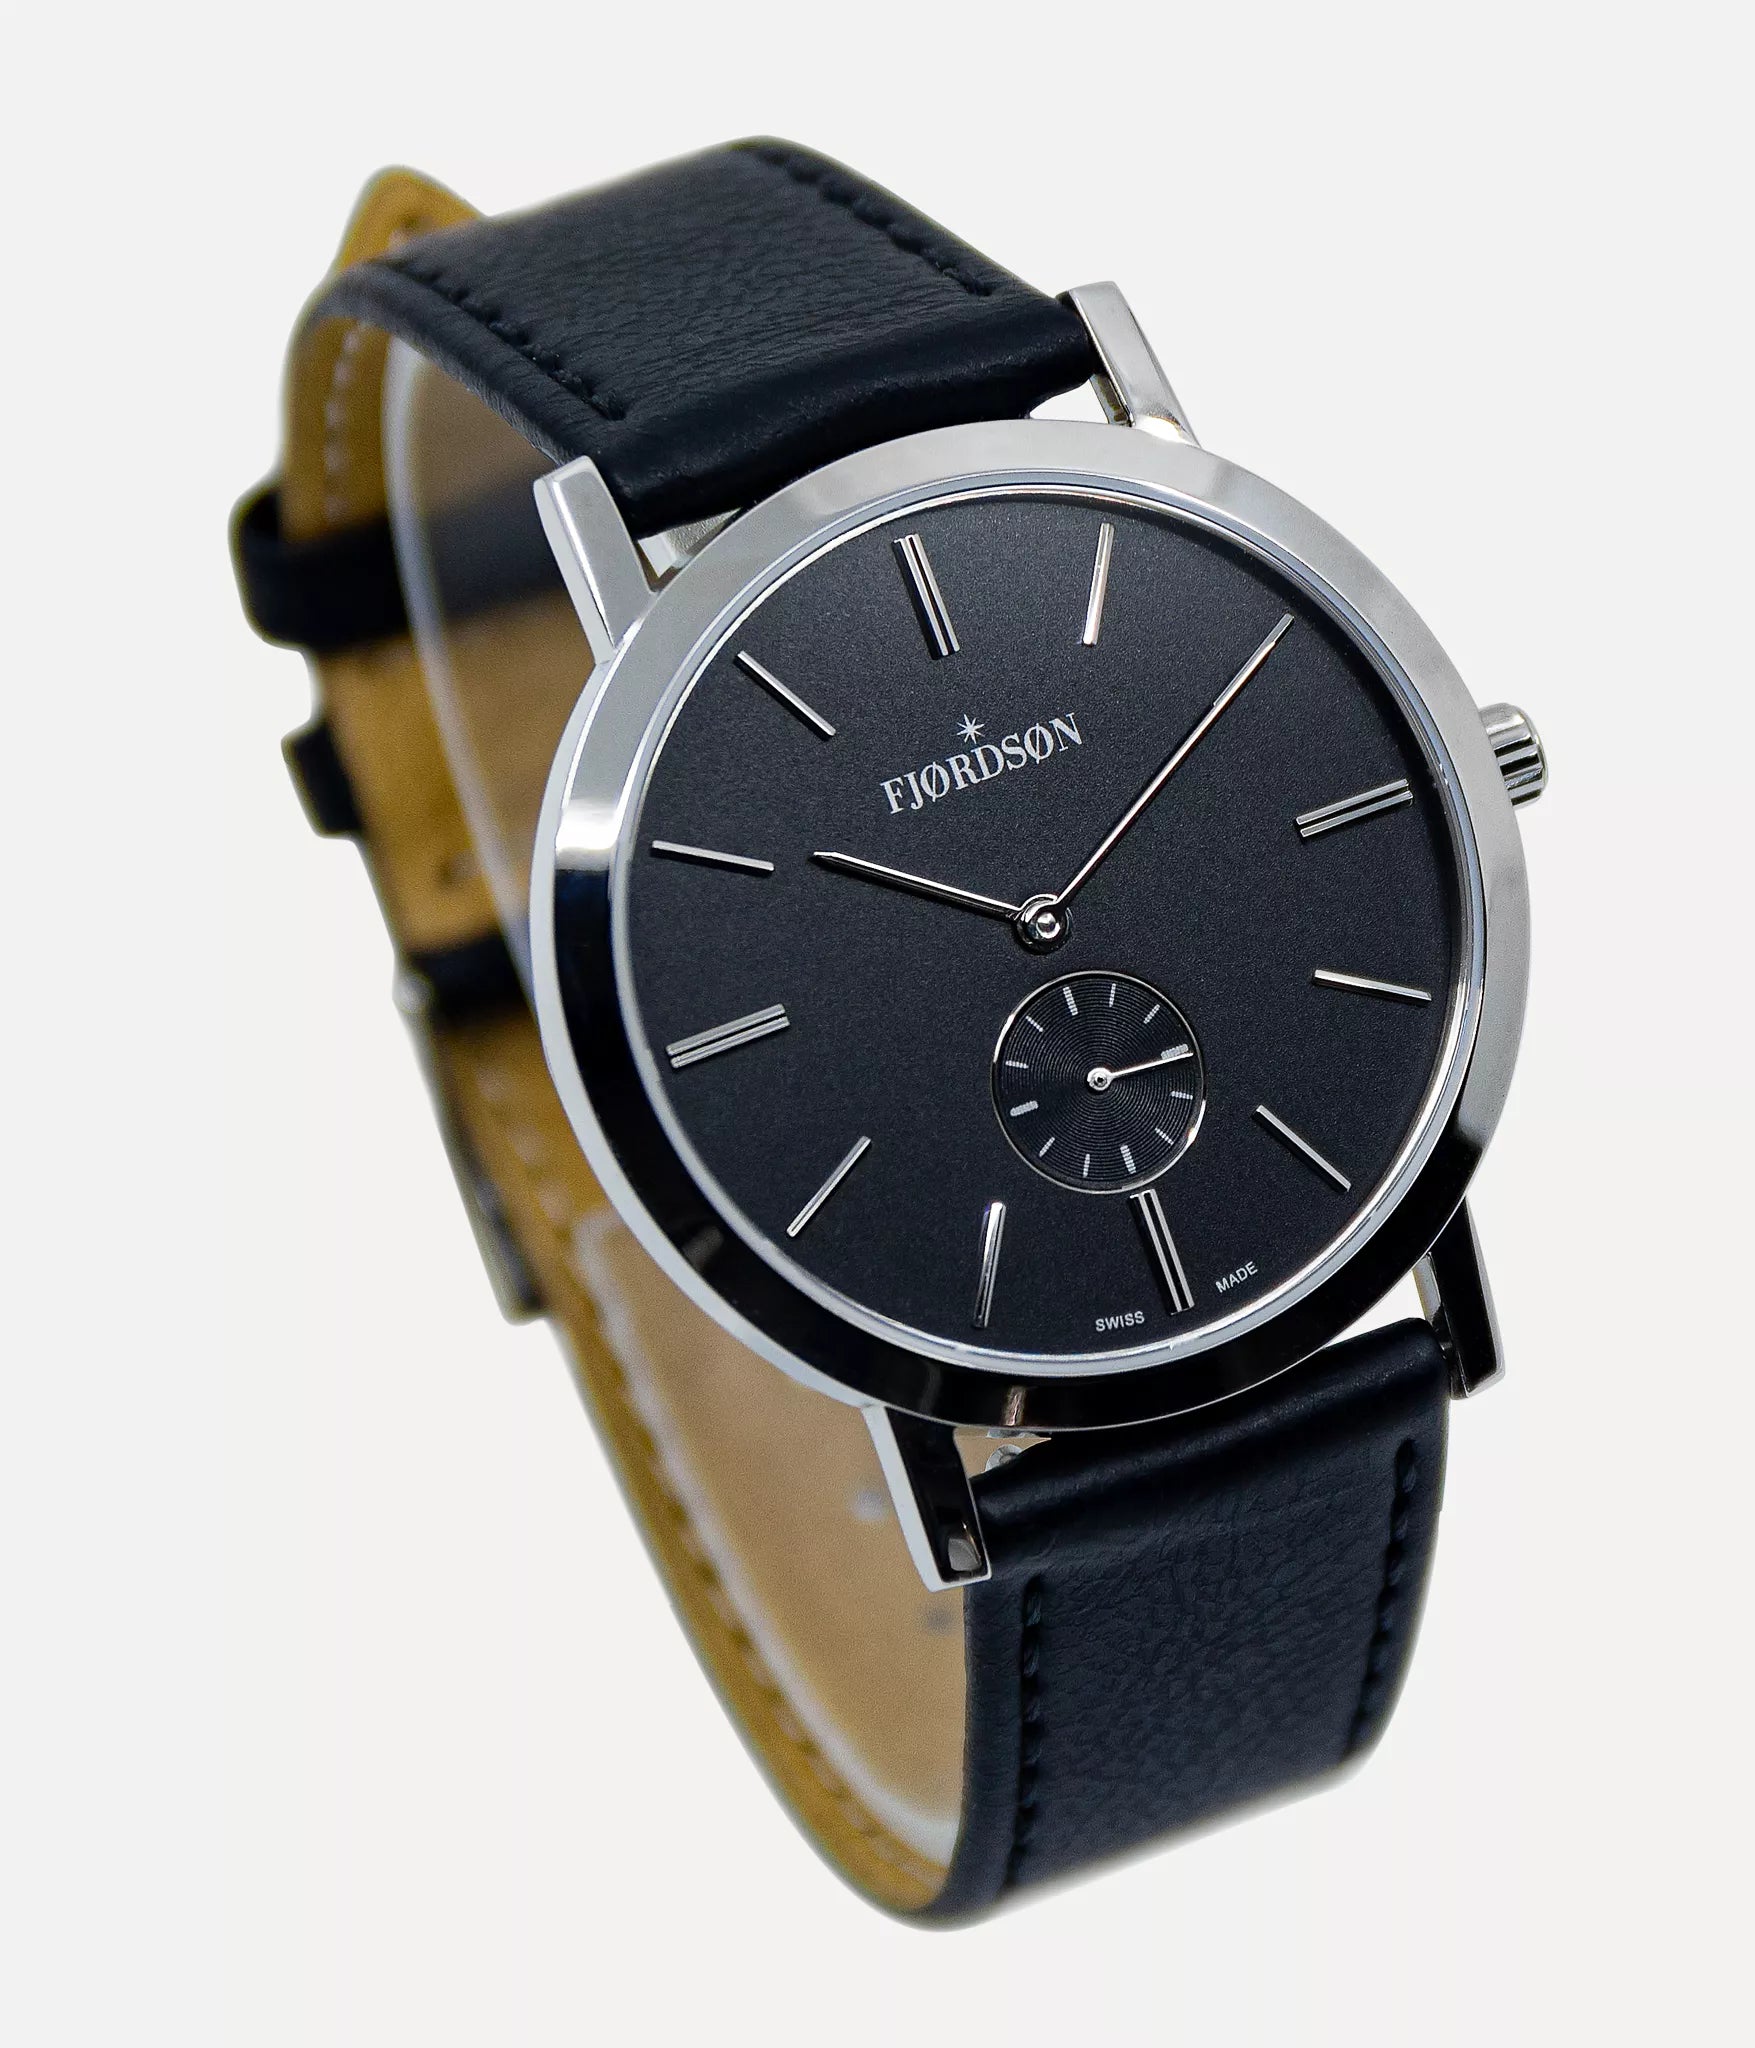 #TIMETOACT - 19mm vegan strap on #SLIM watch with black dial - Silver - Fjordson